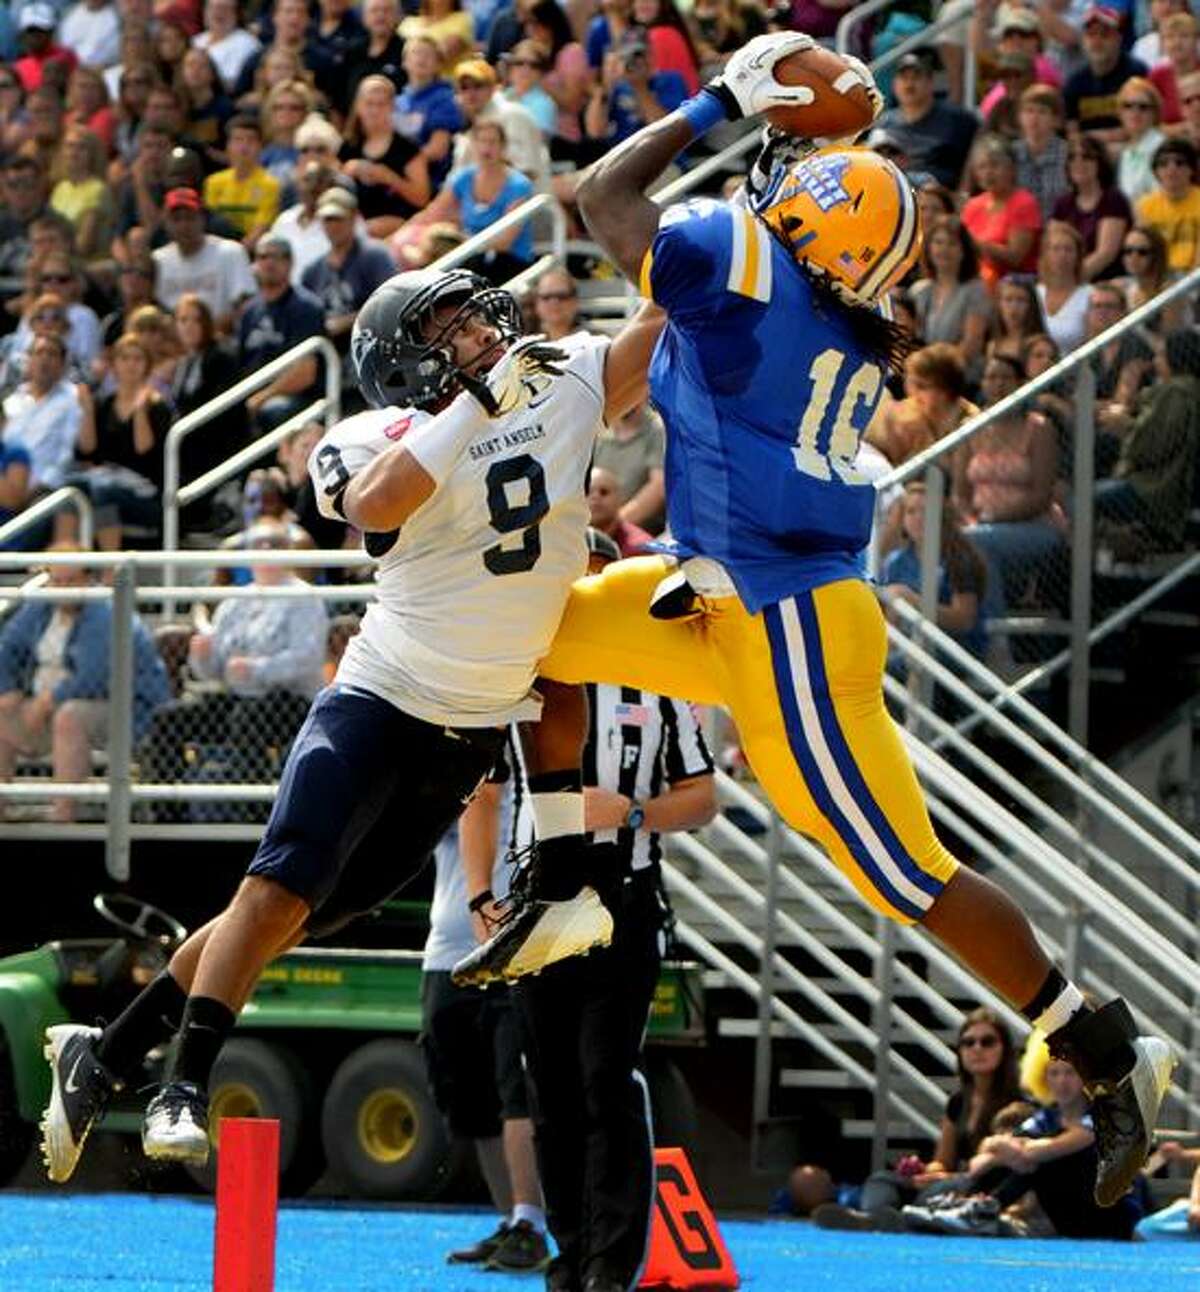 Tight end Kameel Lashley of the University of New Haven pulls in a touchdown pass against Sam Walker of St. Anselm College during second quarter football action at the University of New Haven Saturday, September 22, 2012Photo by Peter Hvizdak / New Haven Register